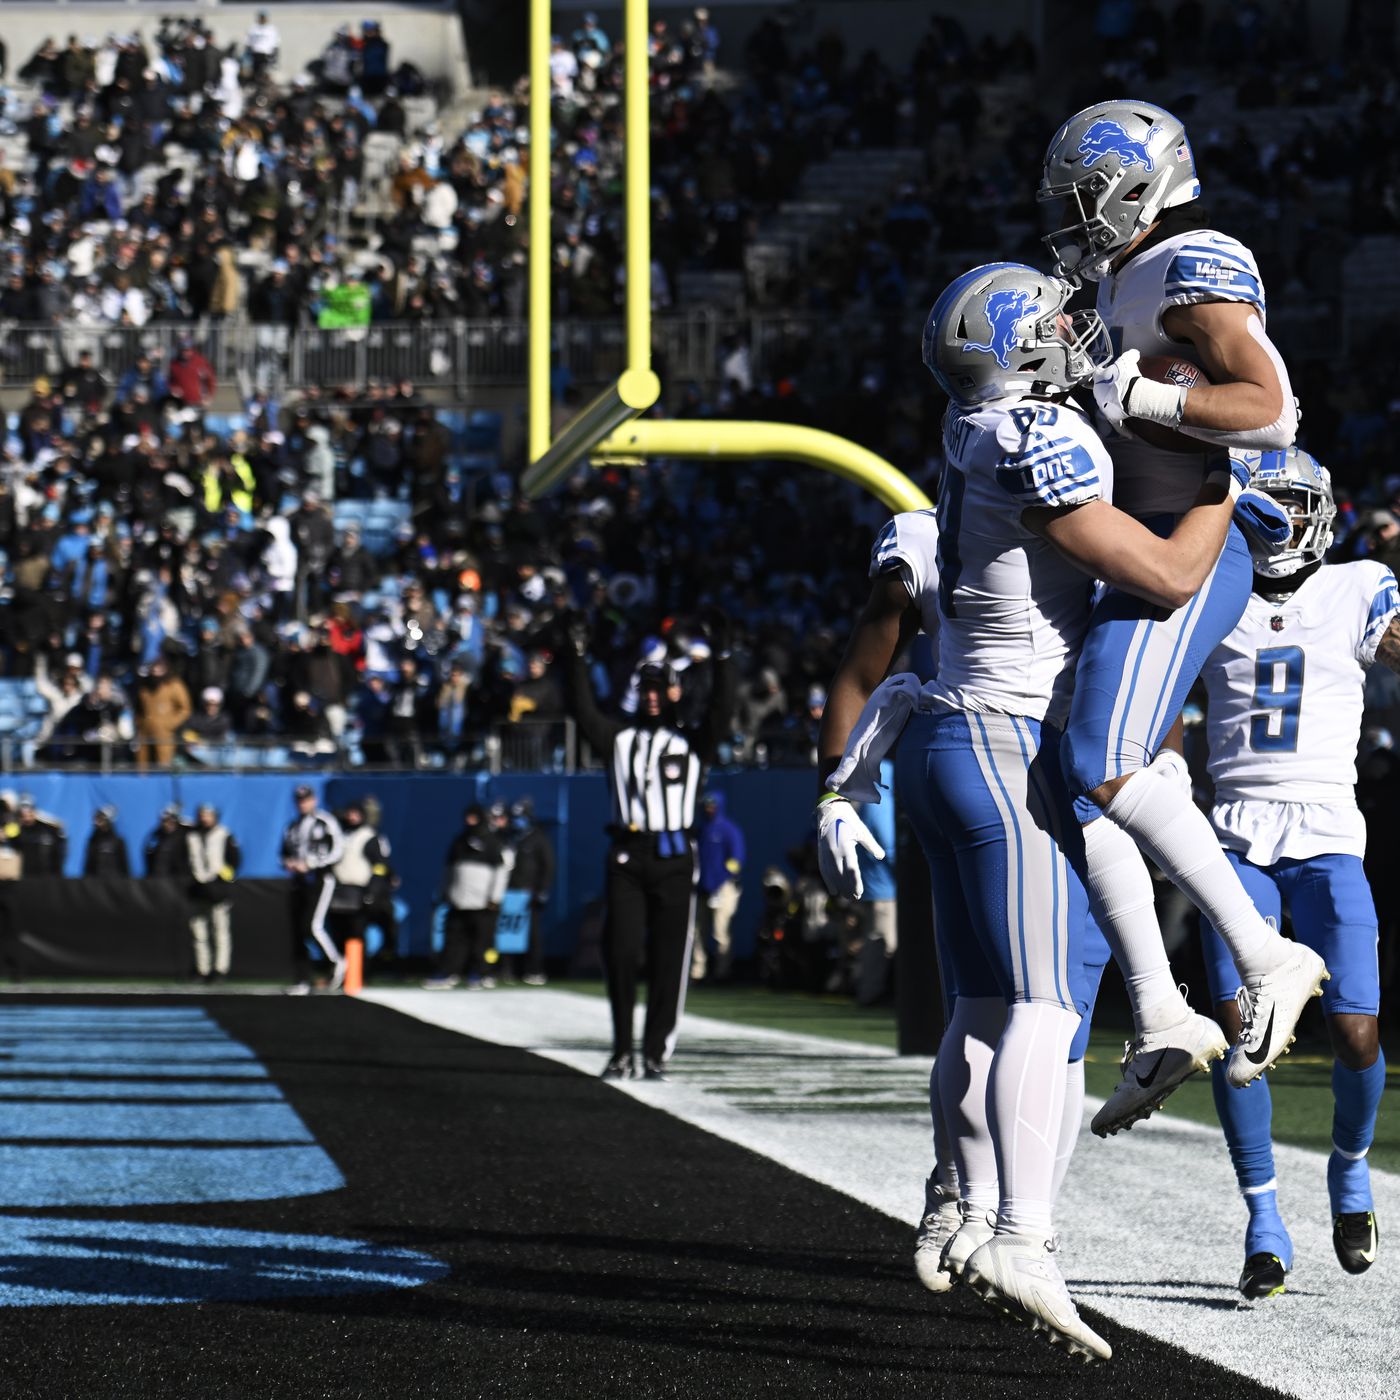 detroit lions chance of making playoffs